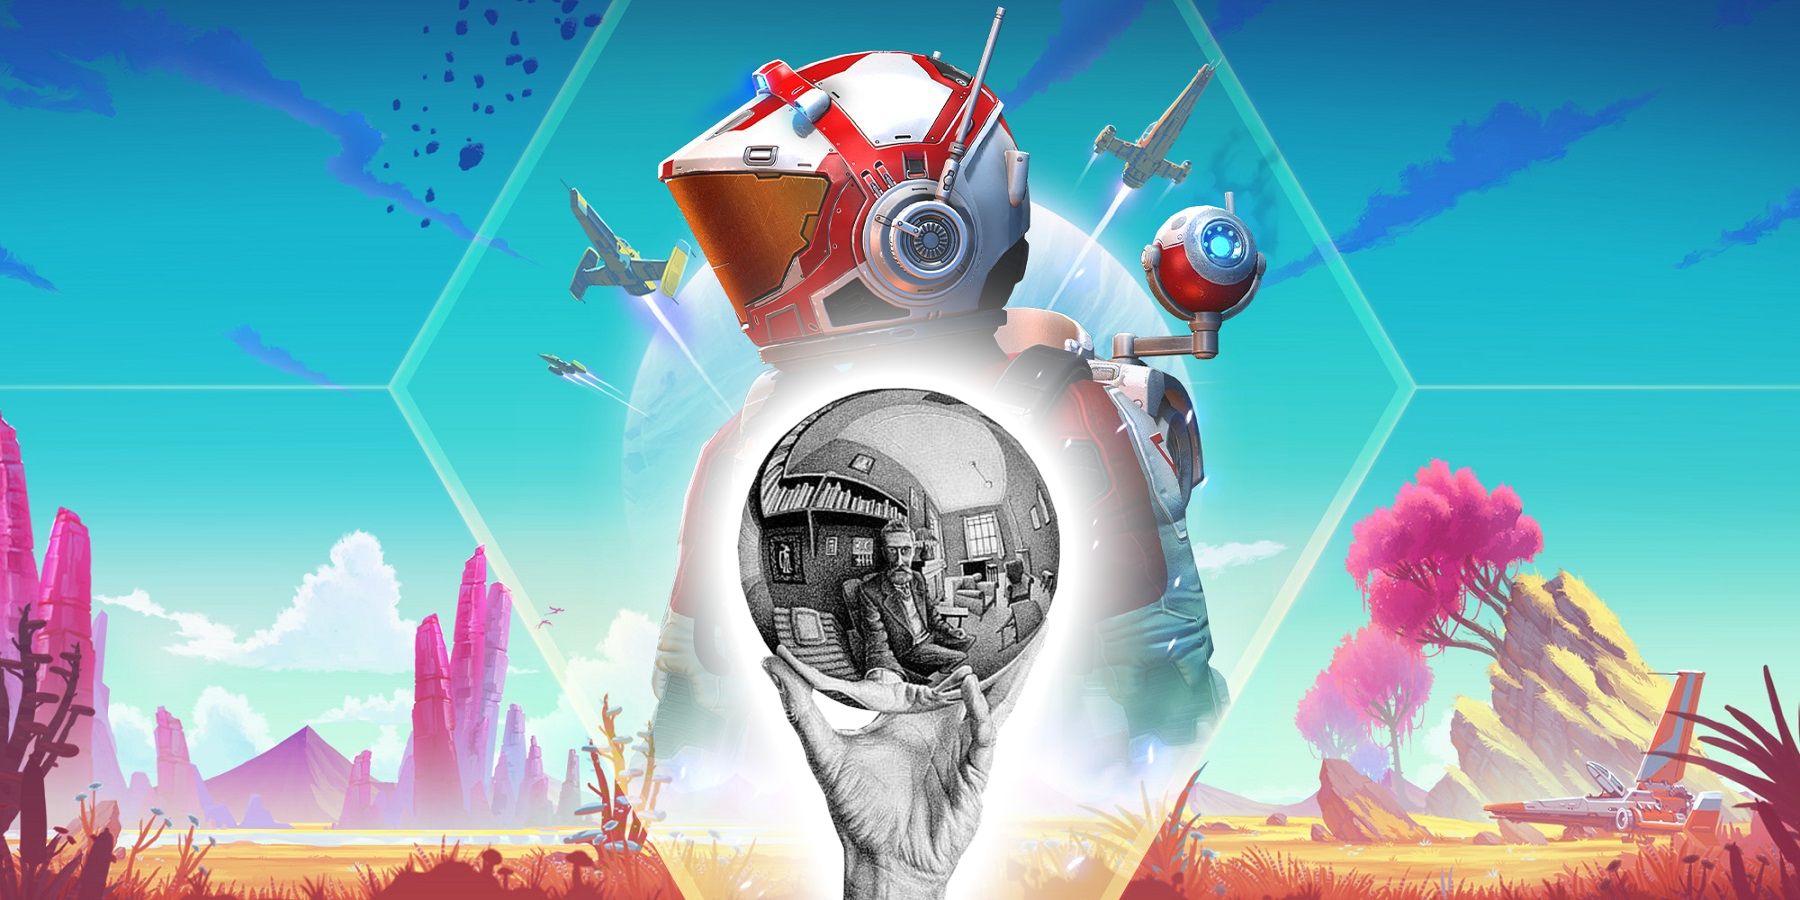 No Man's Sky image showing the Traveller behind M.C. Escher's famous Hand with Reflecting Sphere drawing.